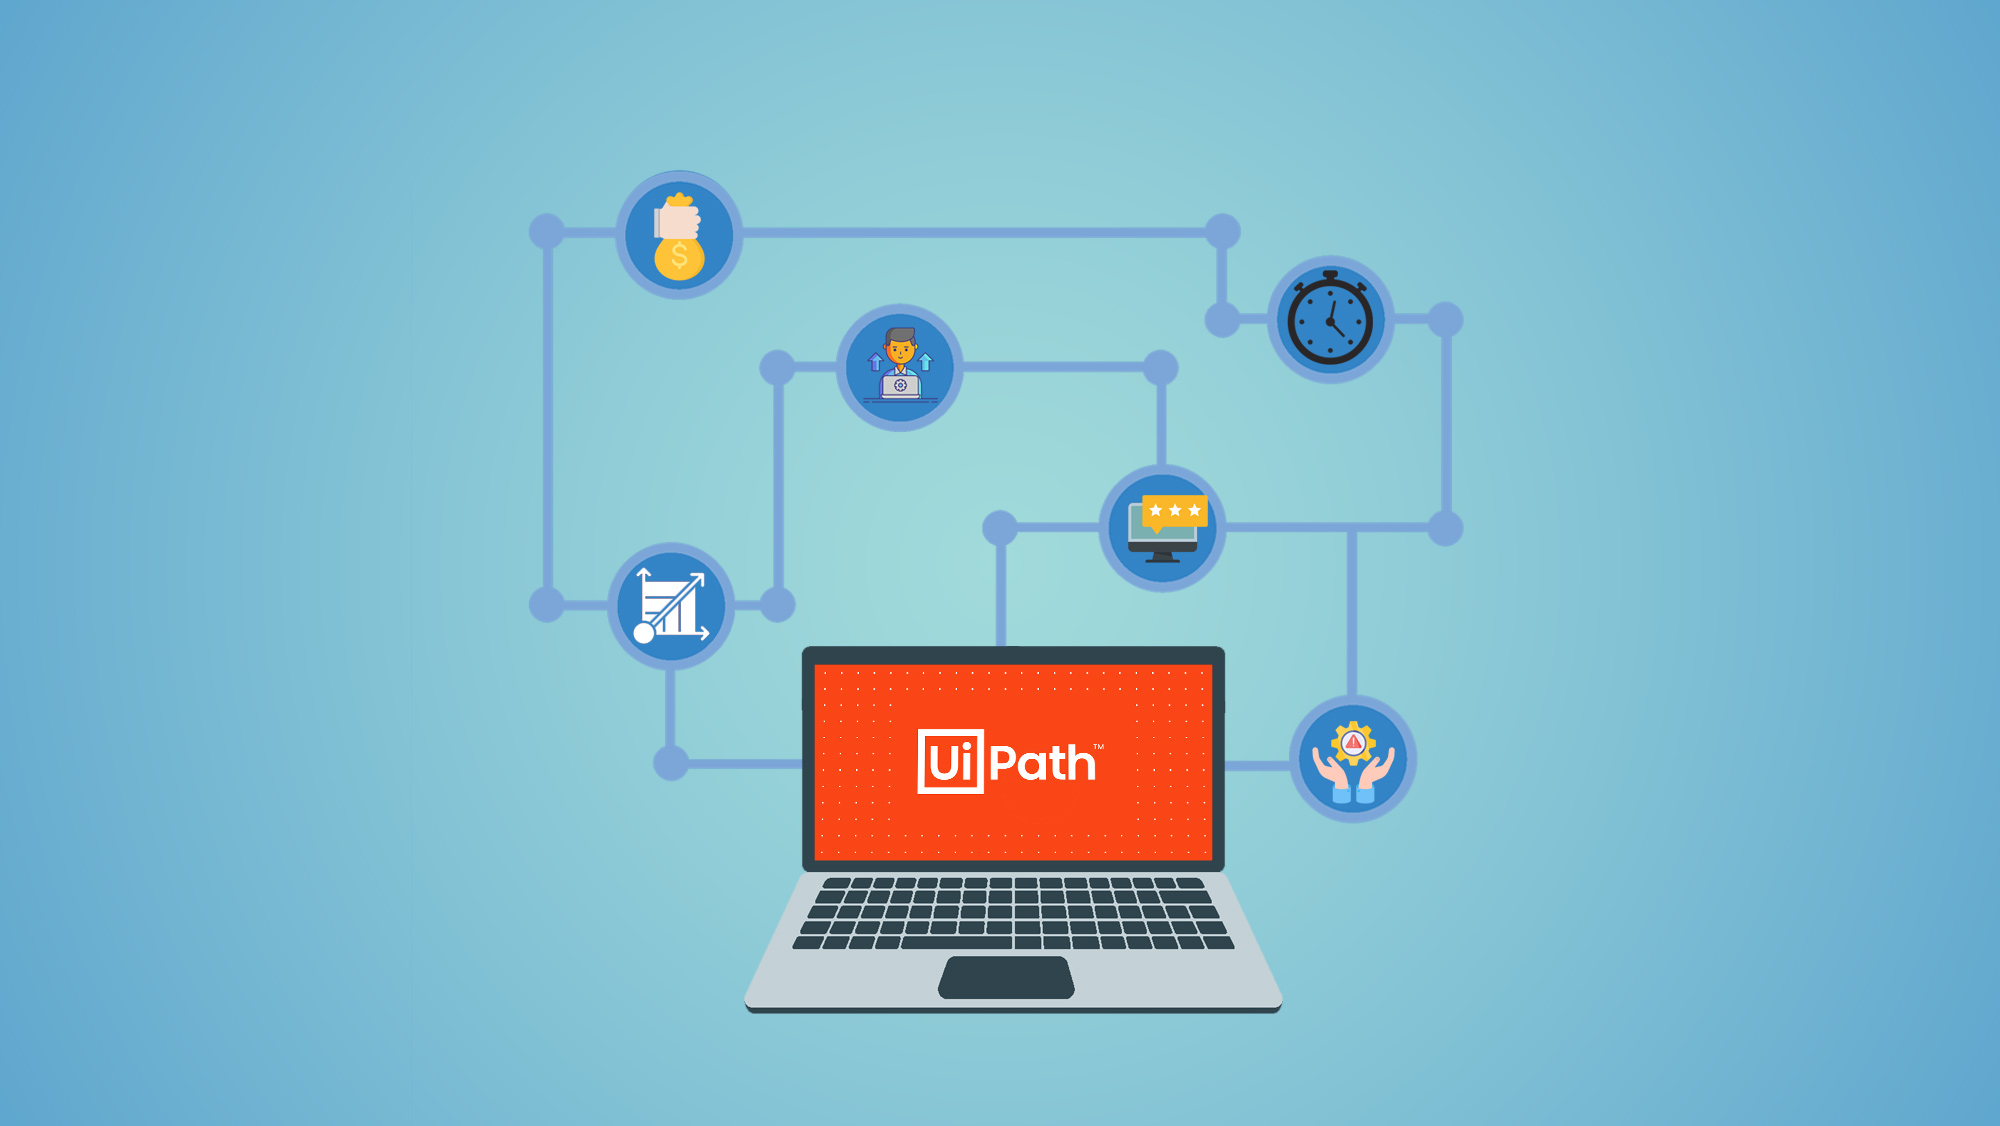 10 Benefits of Implementing UiPath in Your Organization